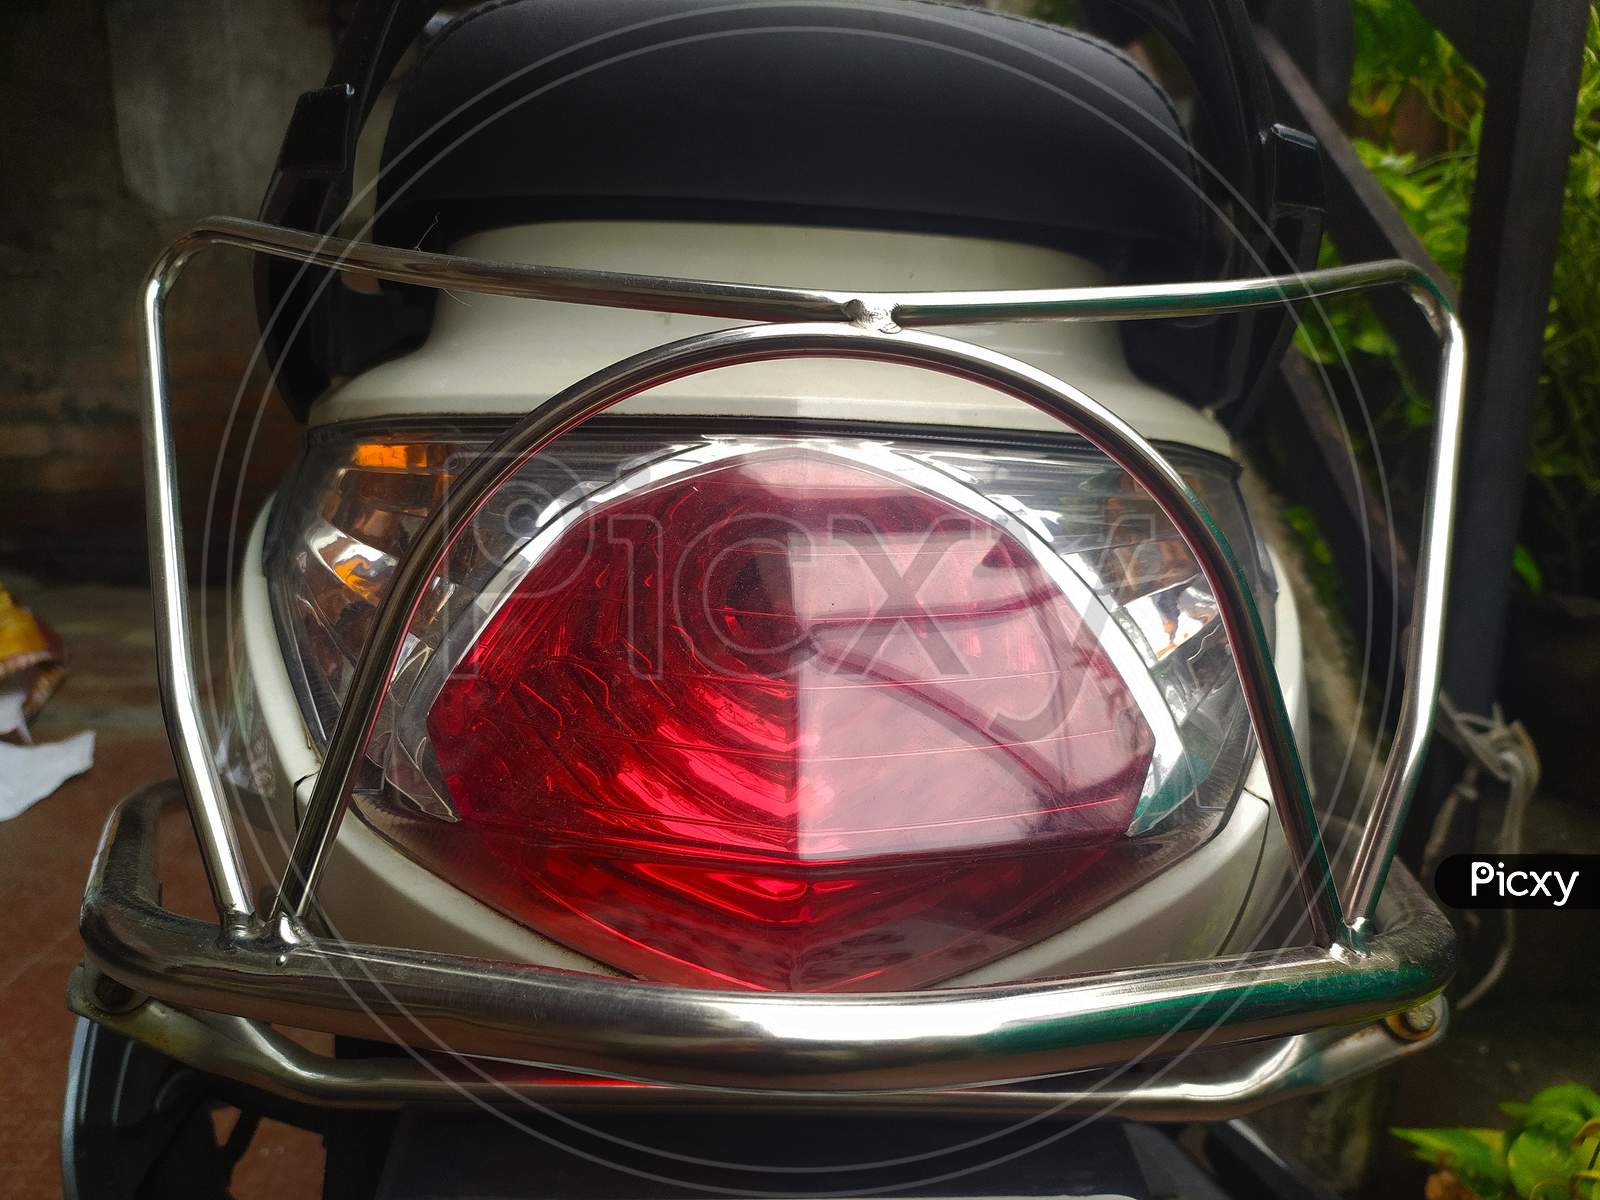 red color indicator light of two wheeler vehicle, backside